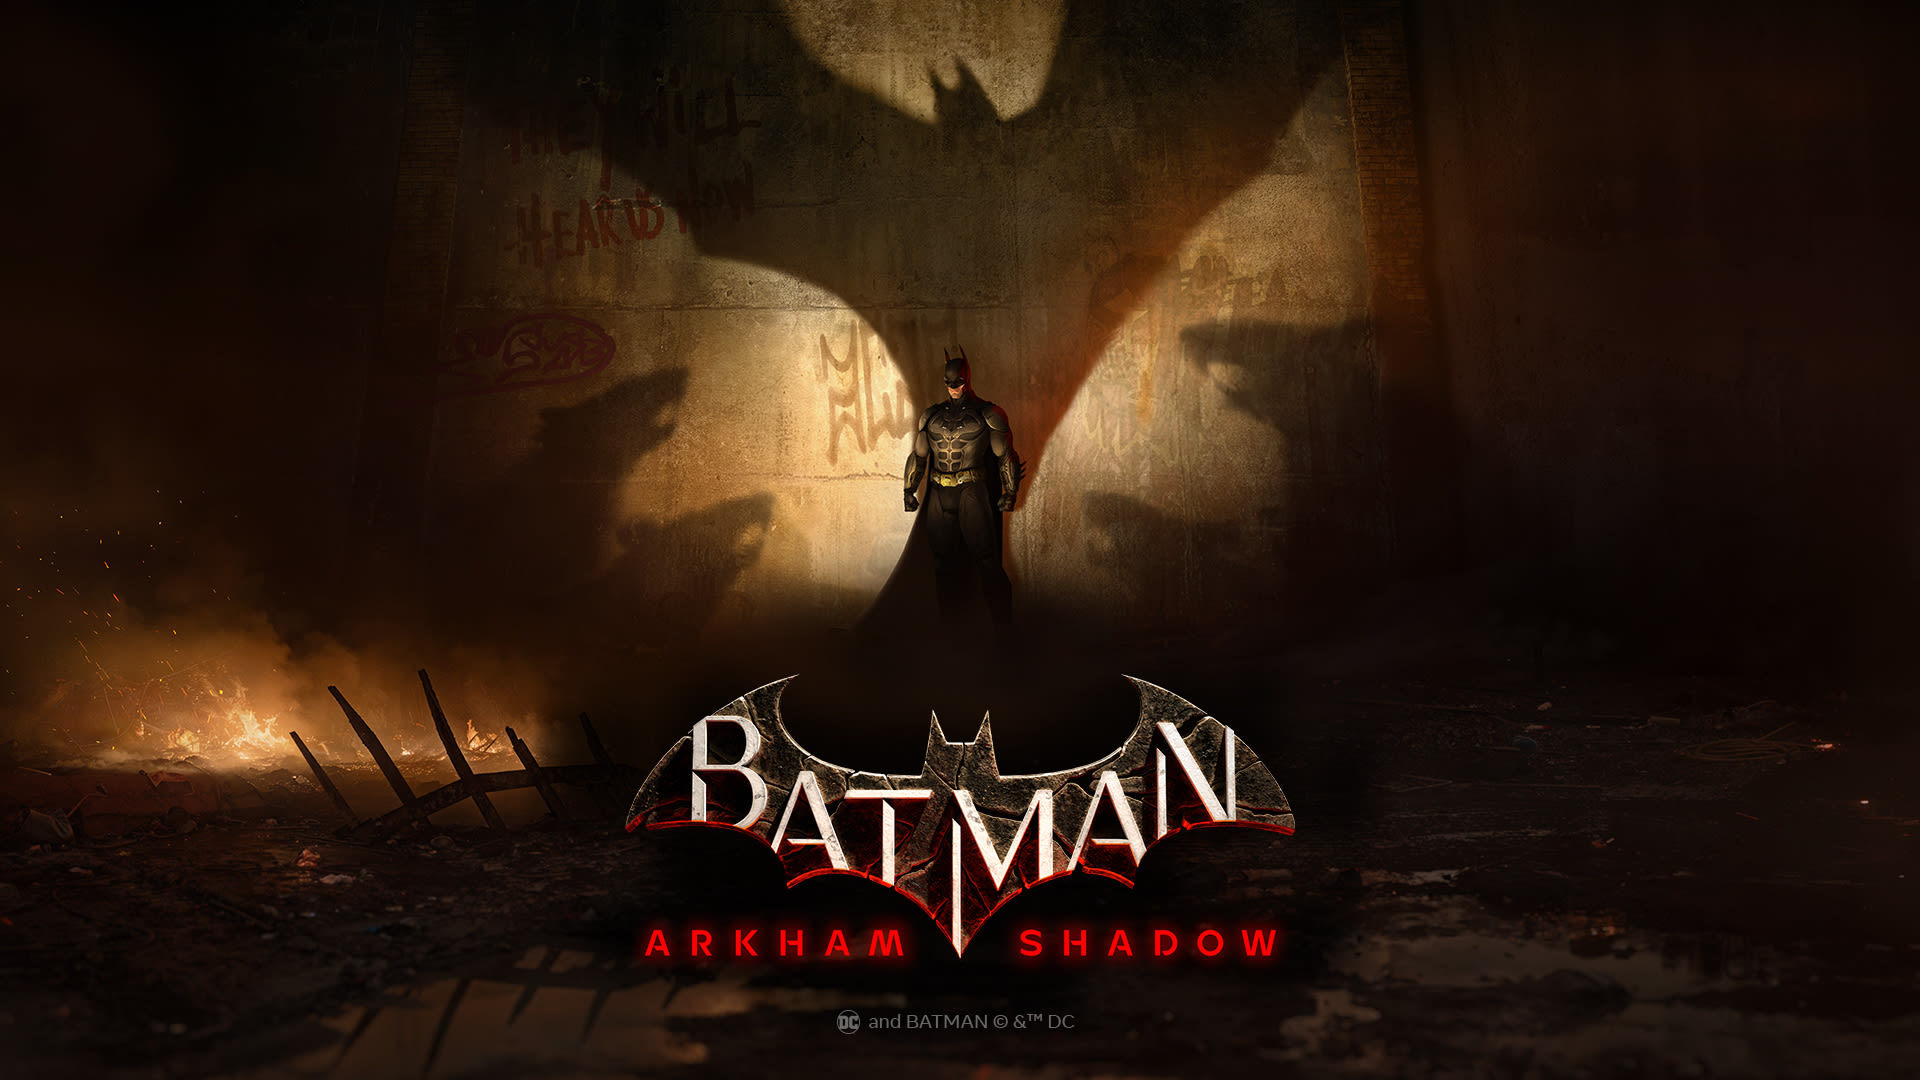 Batman: Arkham Shadow is a new VR game coming to Meta Quest 3 this year